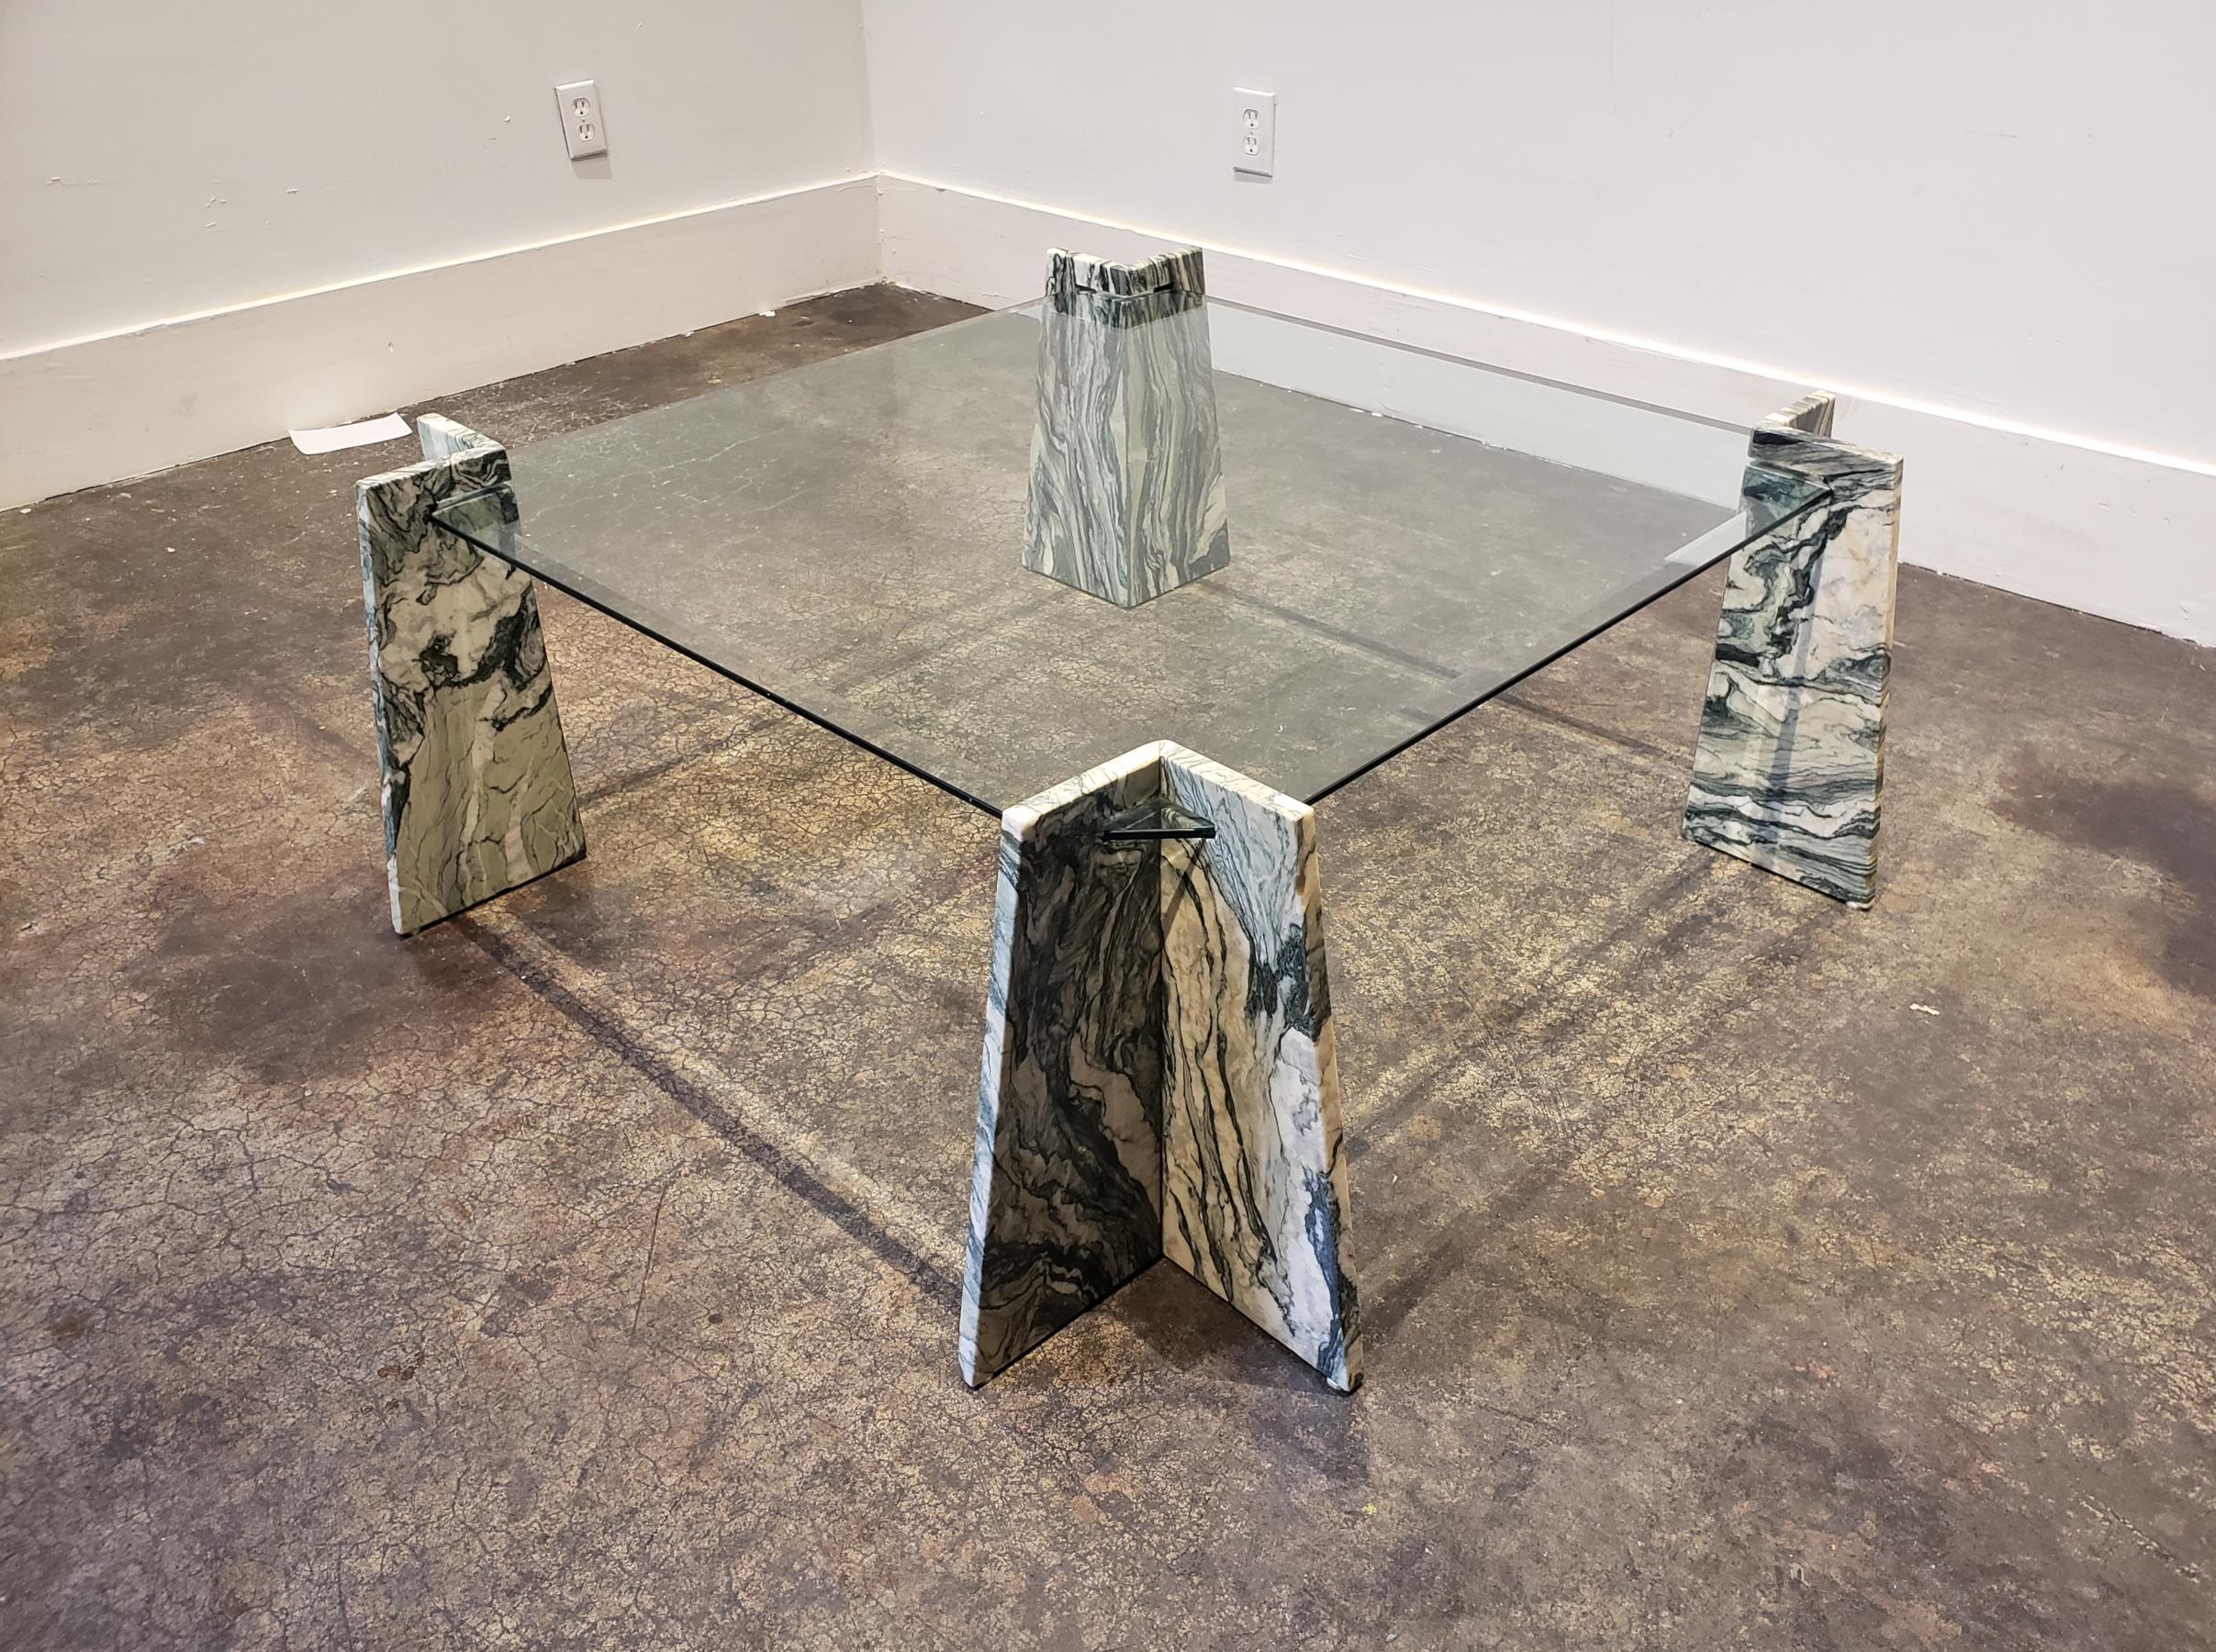 Postmodern glass and marble table with cut green marble legs and beveled glass top. Top slides into groves in the tapered V-shaped legs. Overall good condition with light wear.
Dimensions: 42